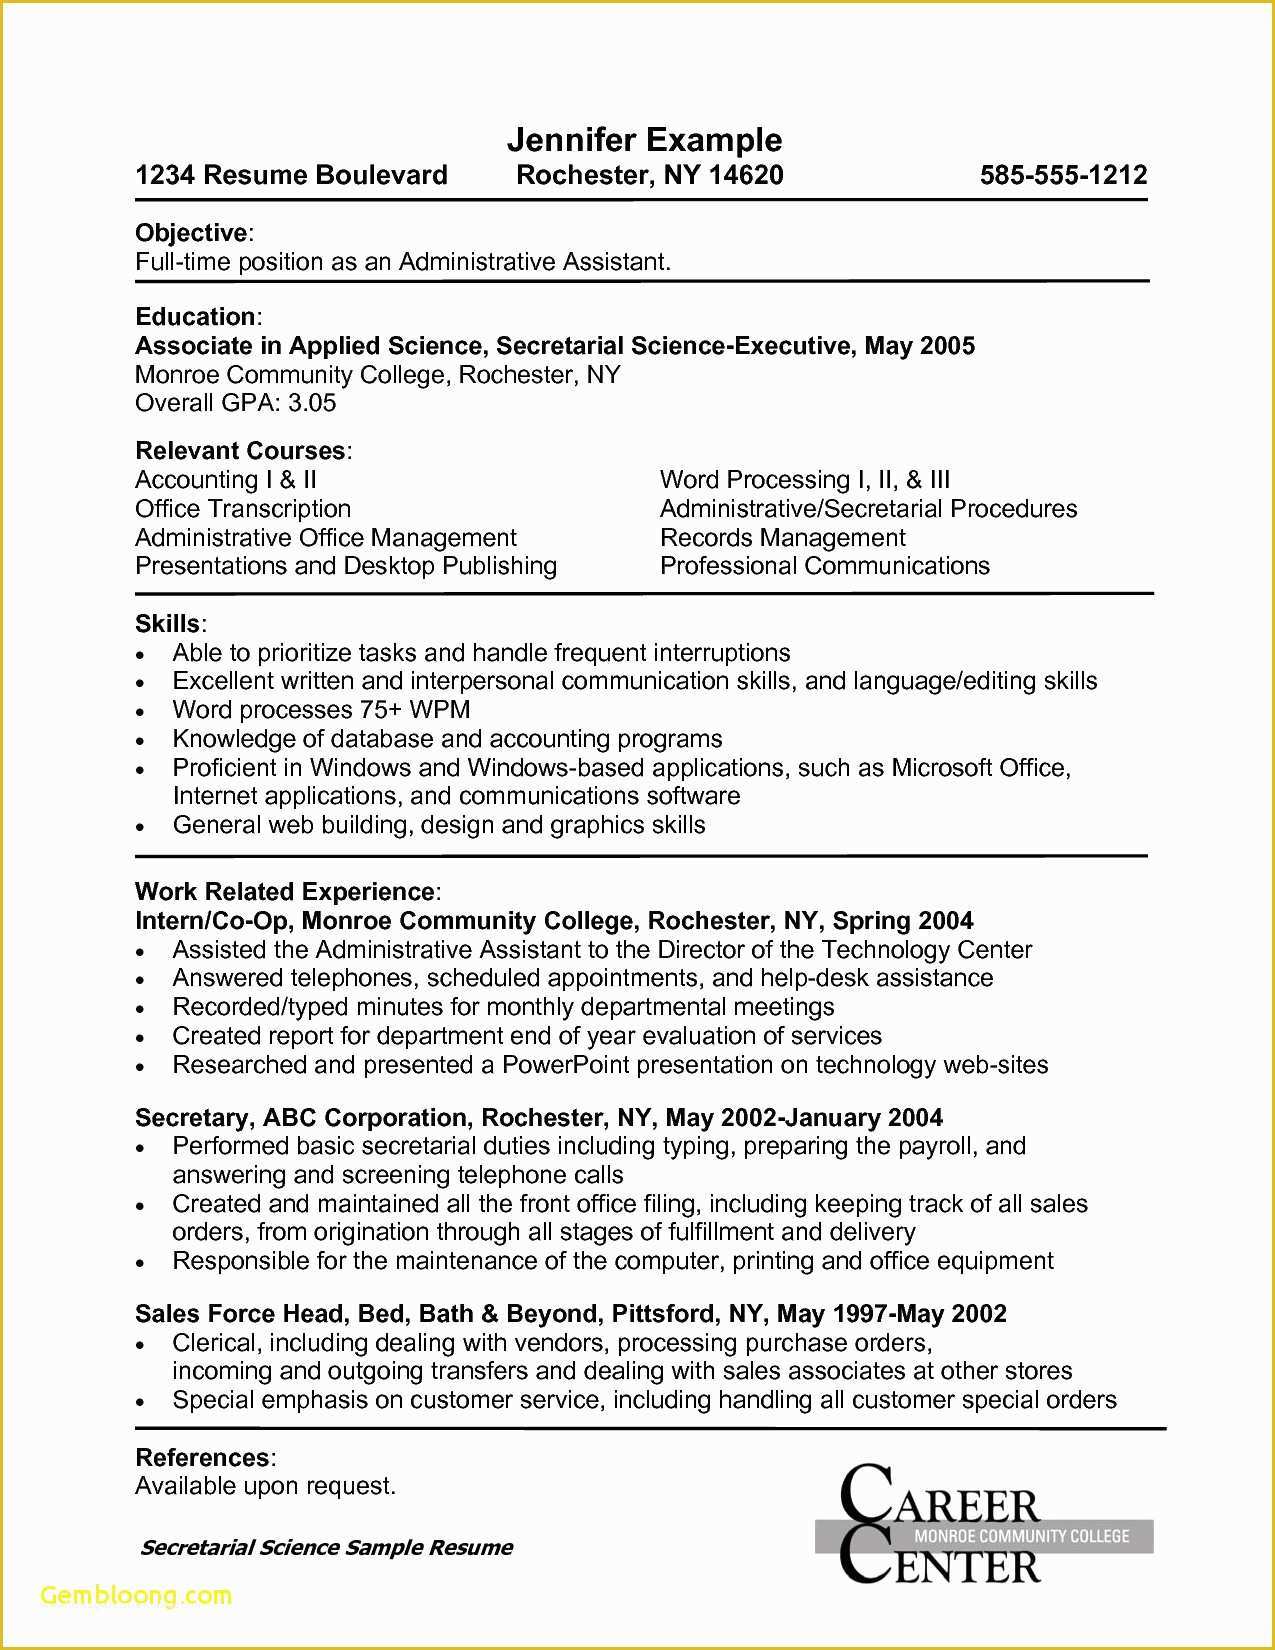 ats-resume-template-free-download-of-executive-assistant-resume-samples-free-reference-free